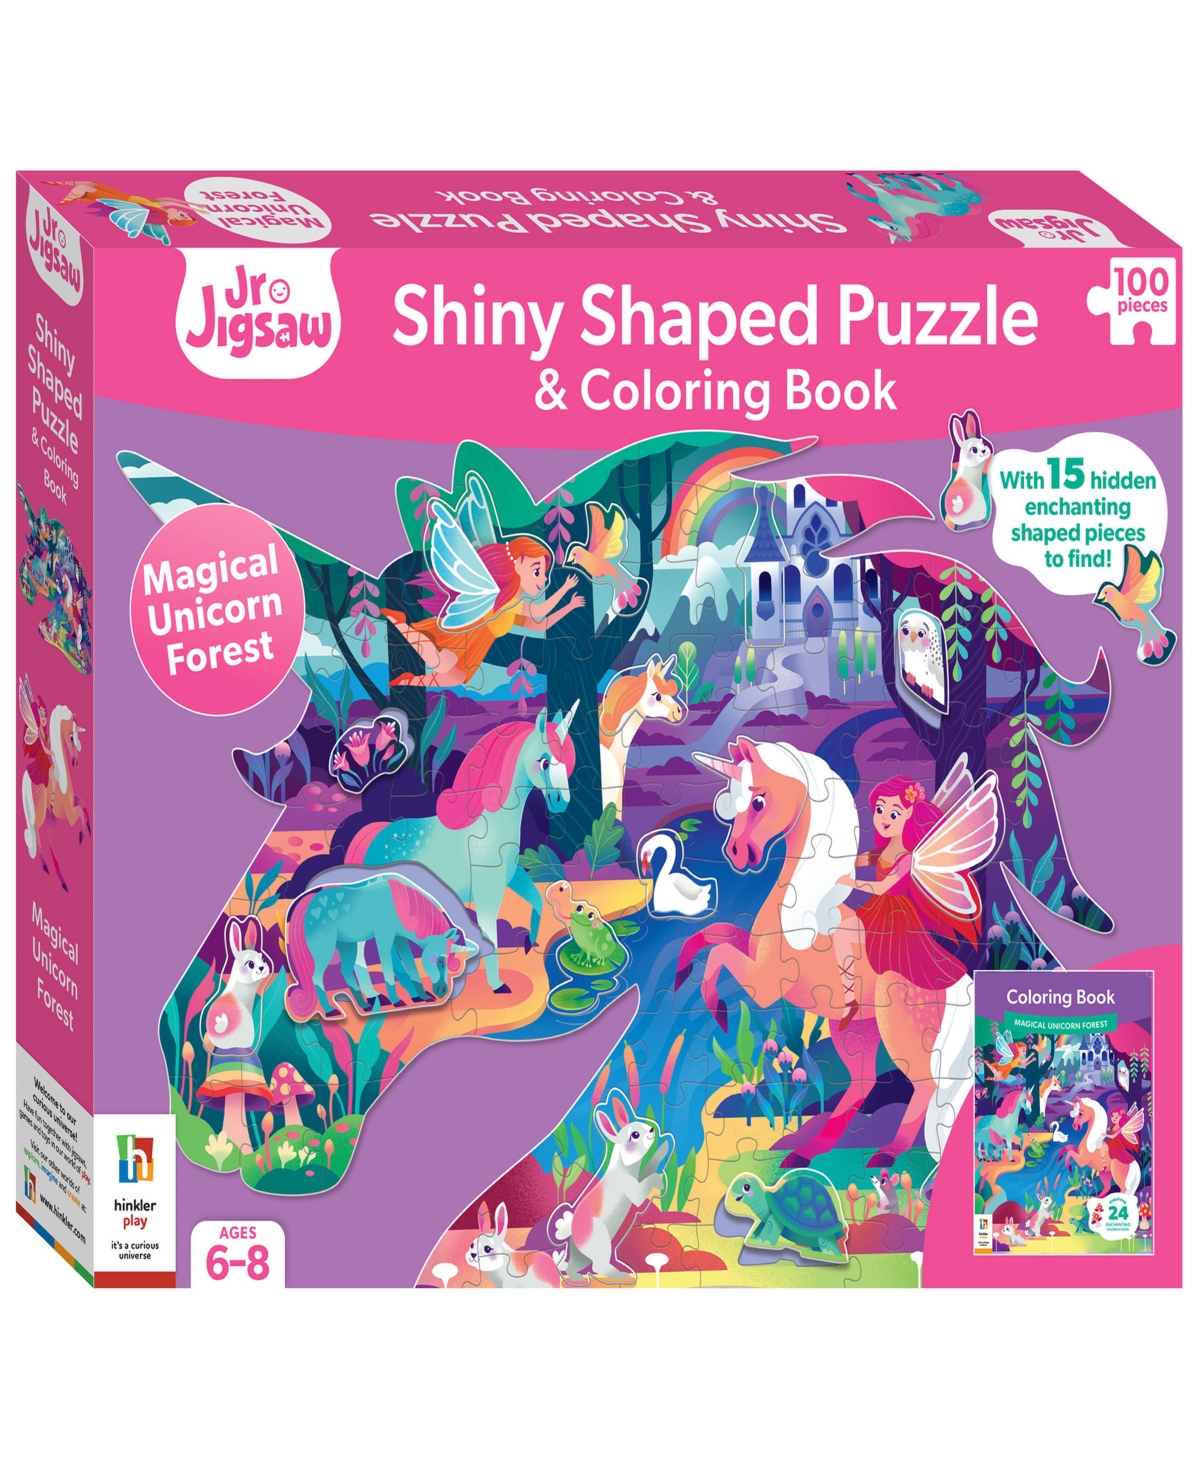 Jr. Jigsaw Kids' 100-piece Jigsaw Puzzle Magical Unicorn Forest Shiny Shaped Puzzle Coloring Book 19.3" X 14.2" Fanta In Multi